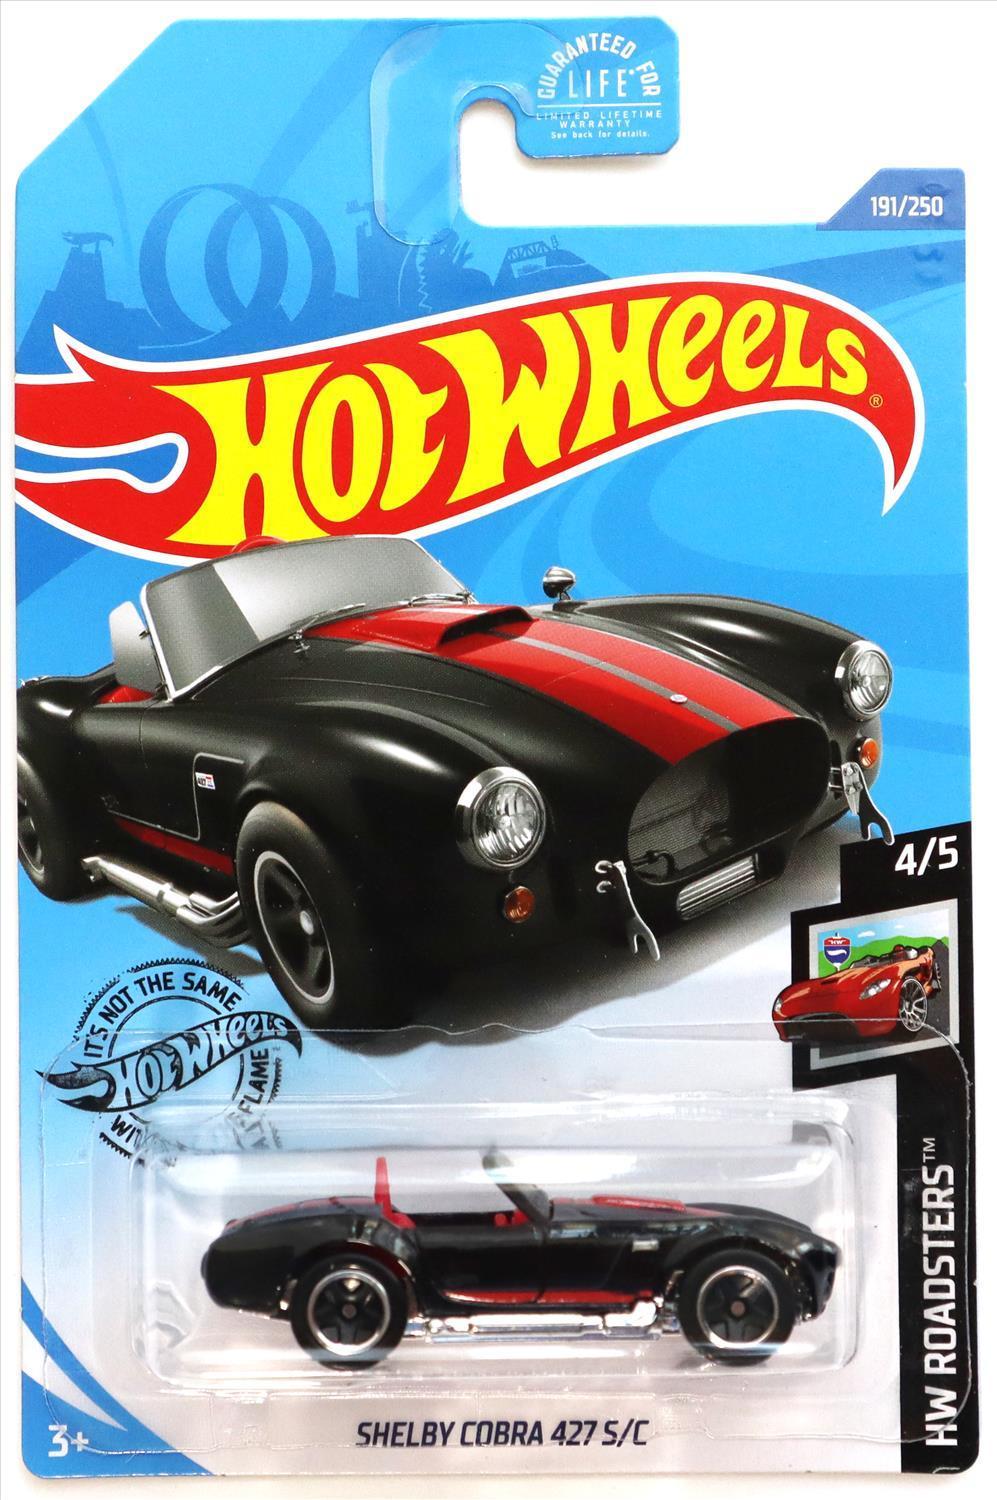 Hot Wheels 2020 - Collector # 191/250 - HW Roadsters 4/5 - Shelby Cobra 427 S/C - Black